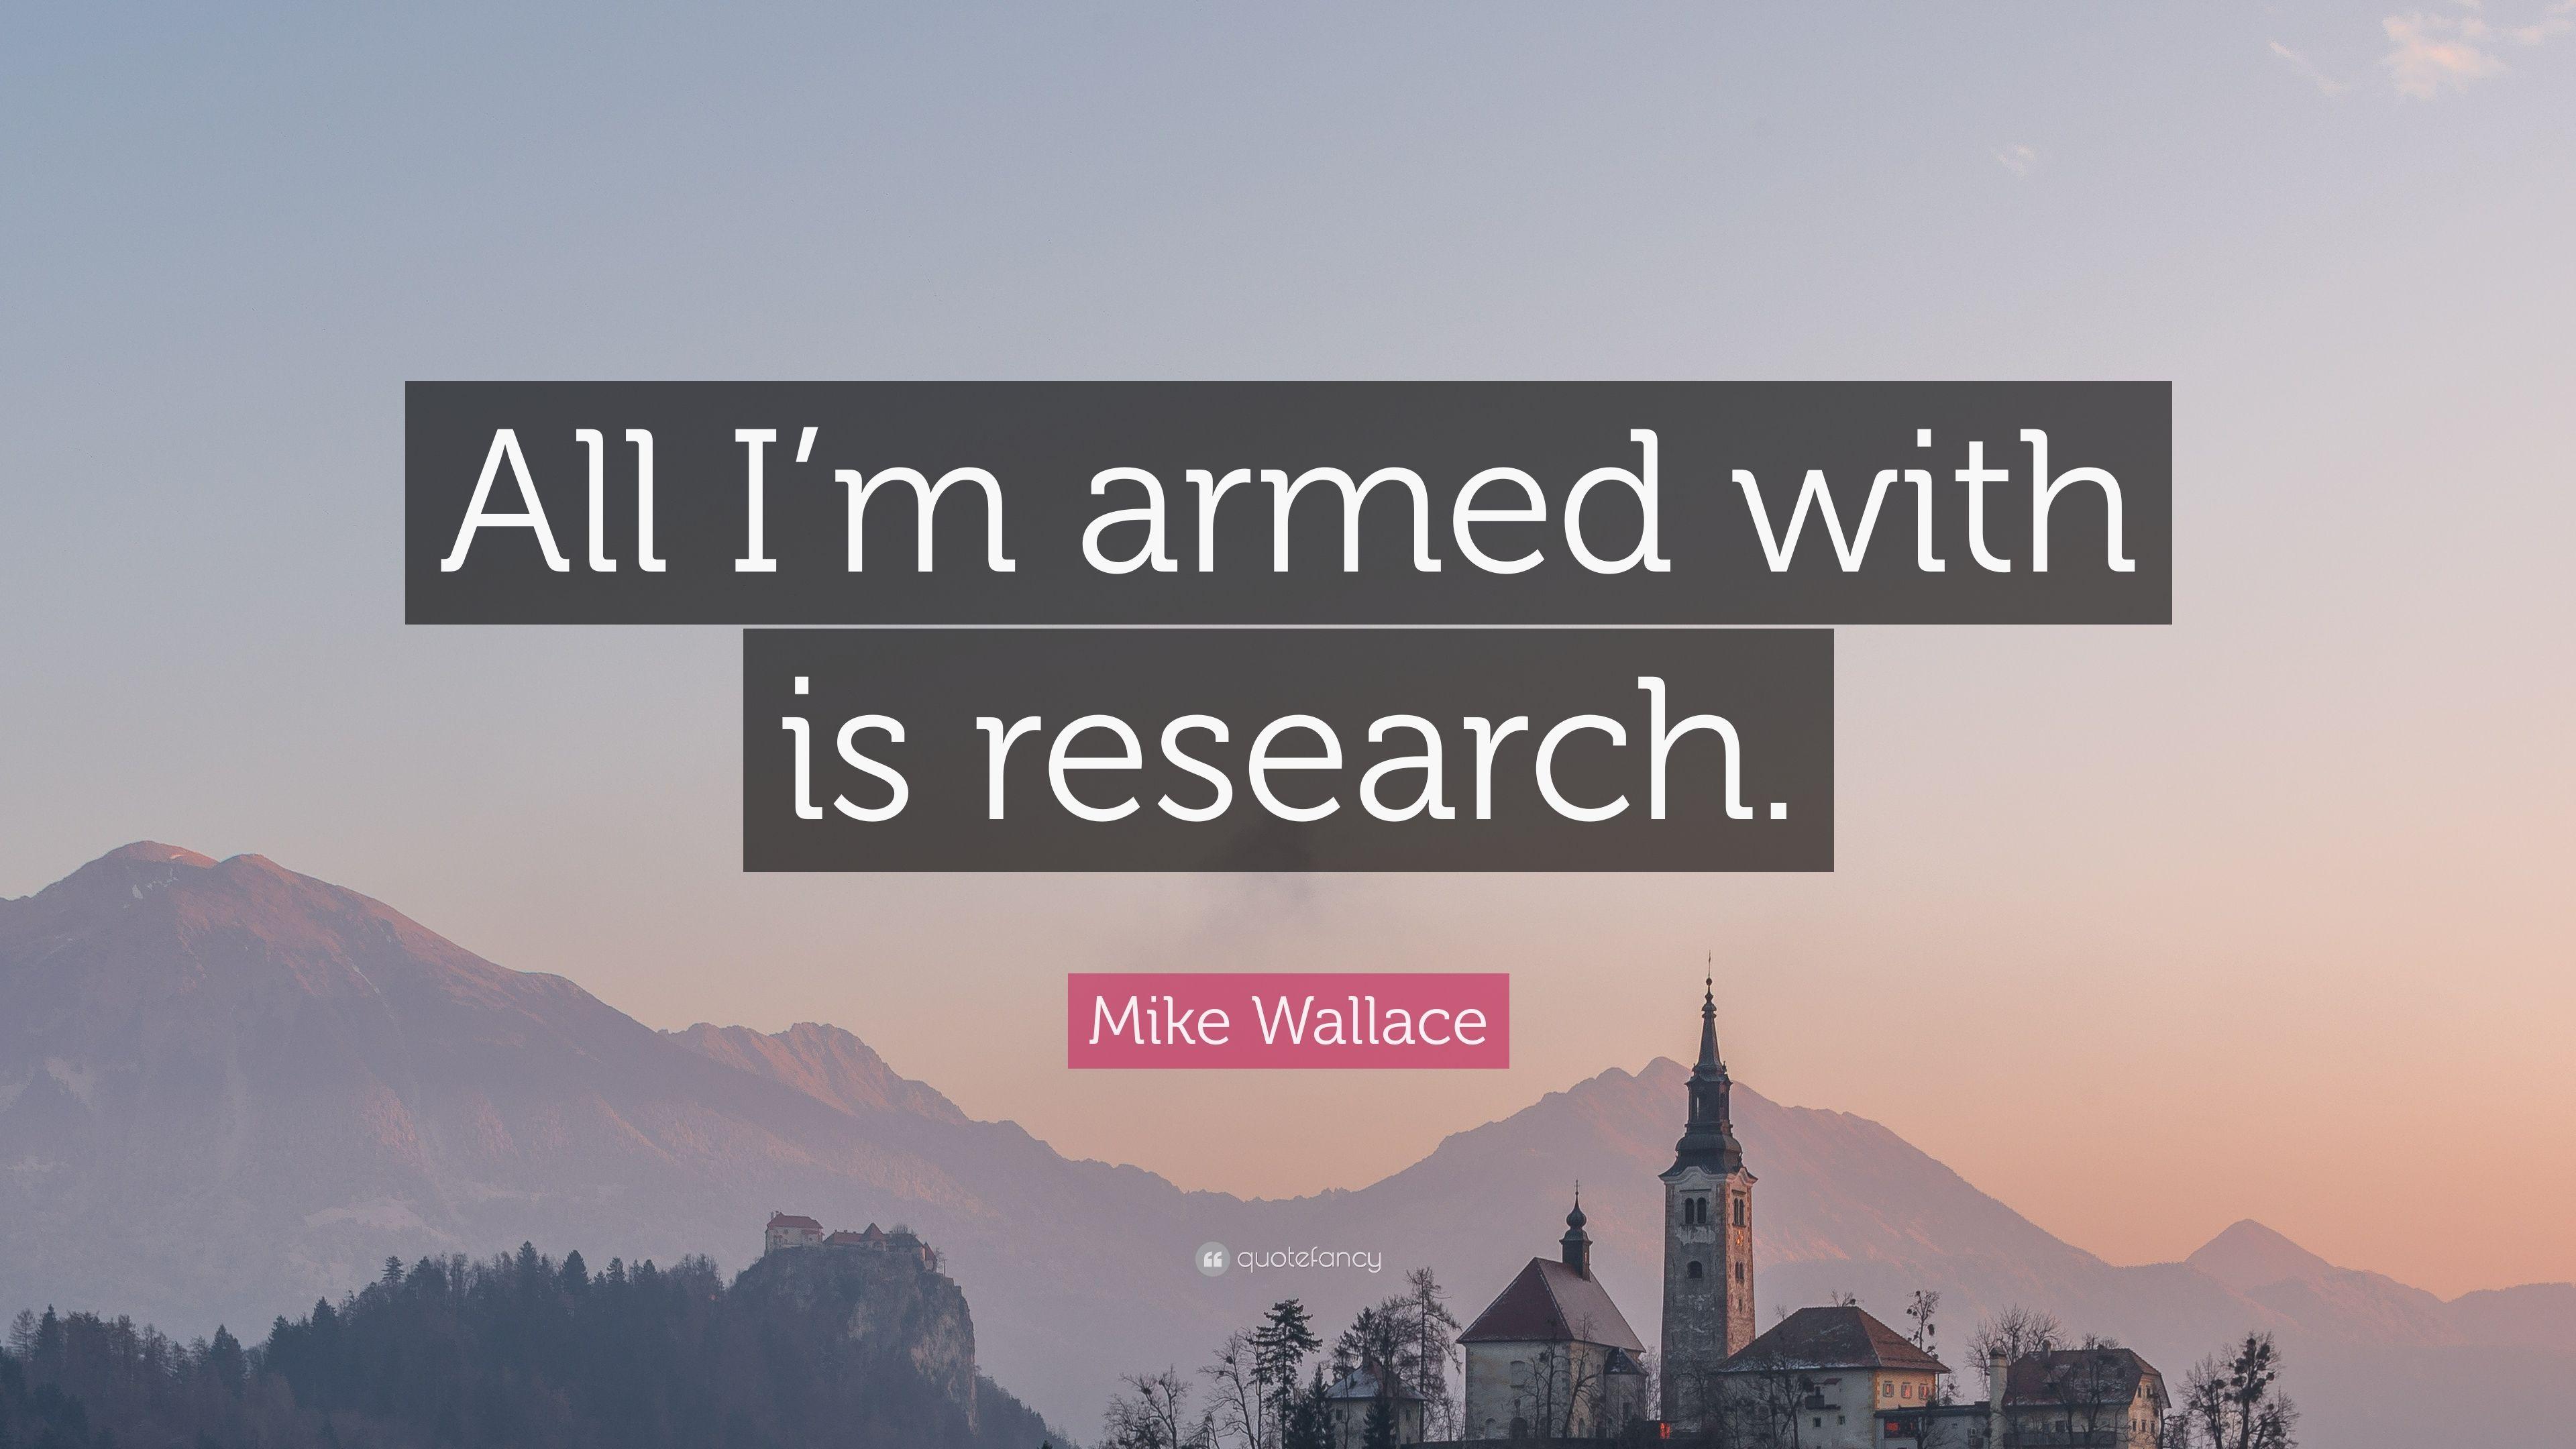 Mike Wallace Quote: “All I'm armed with is research.” 5